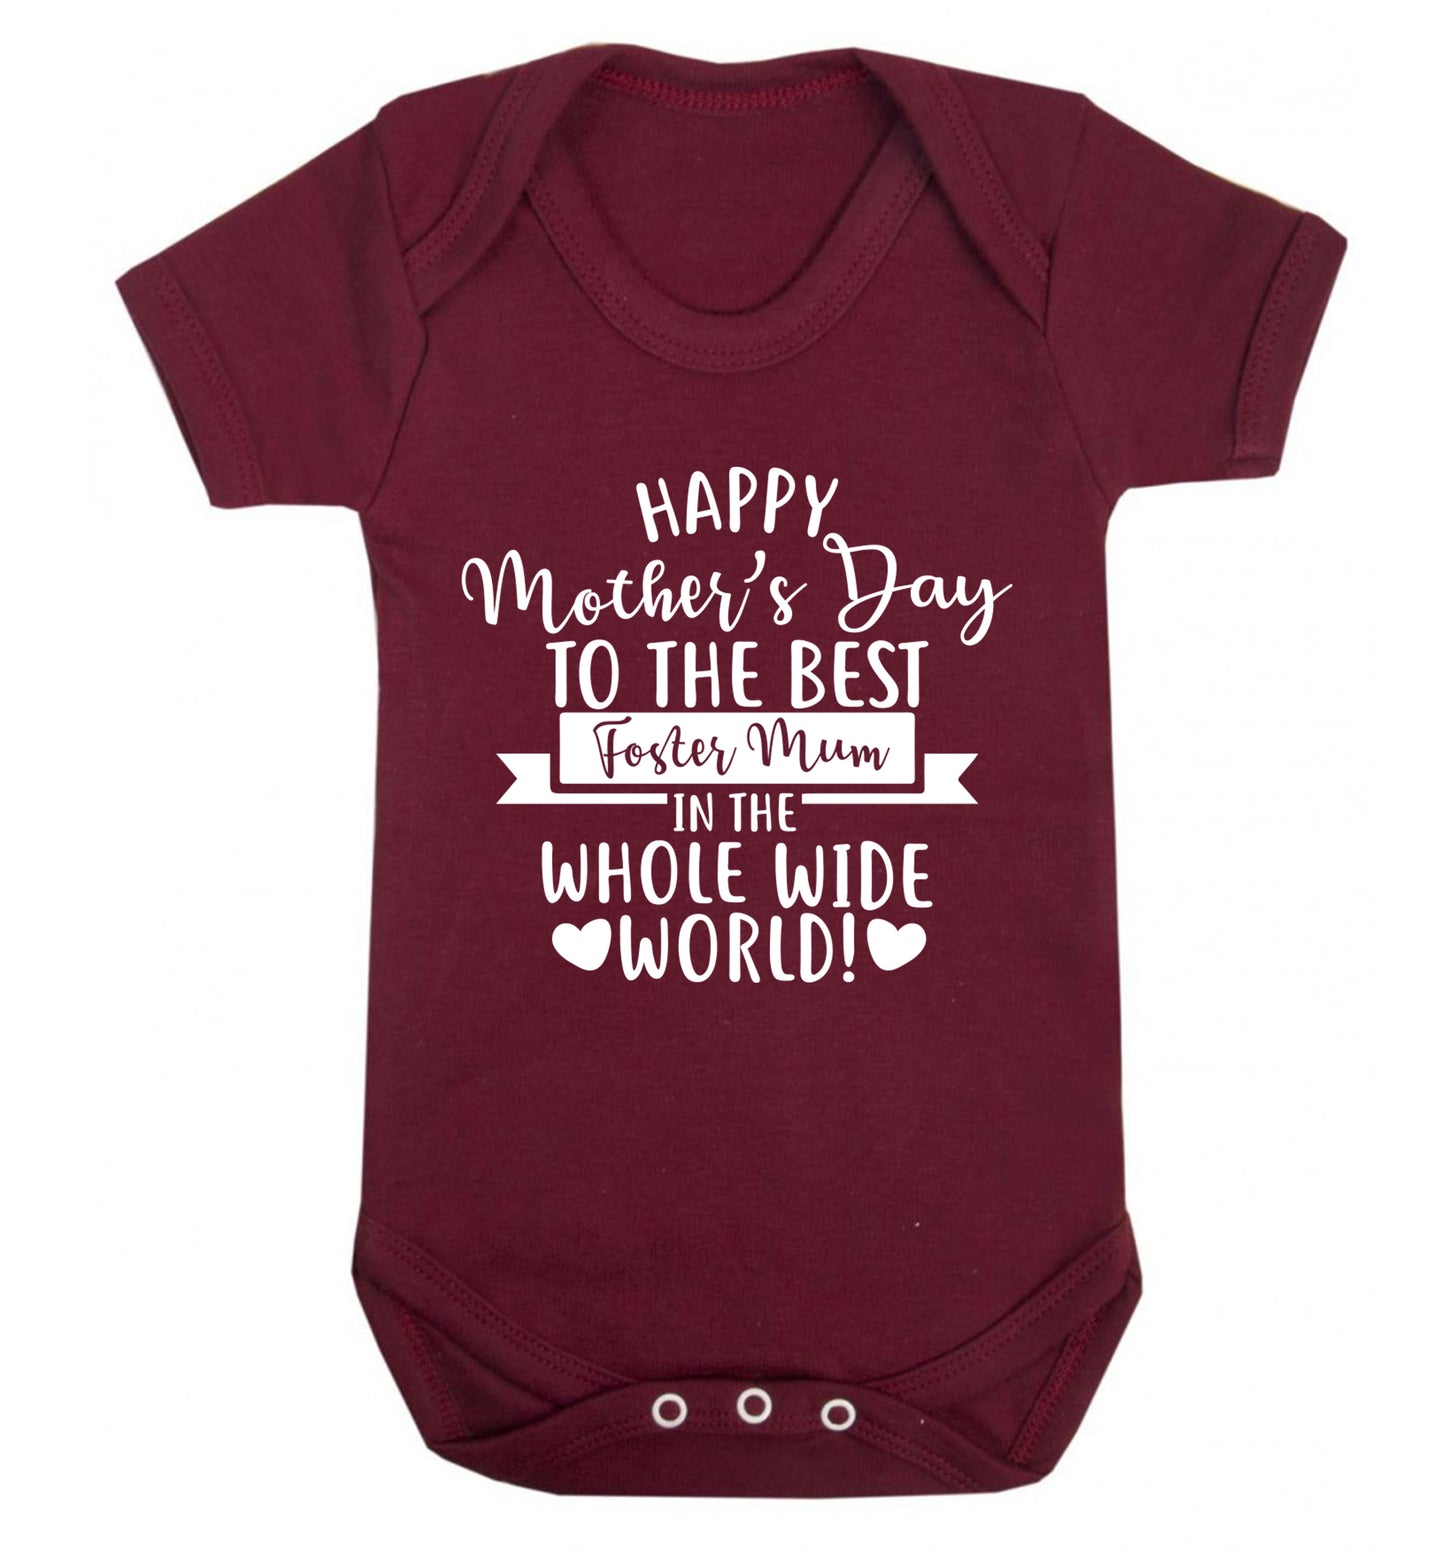 Happy mother's day to the best foster mum in the world Baby Vest maroon 18-24 months